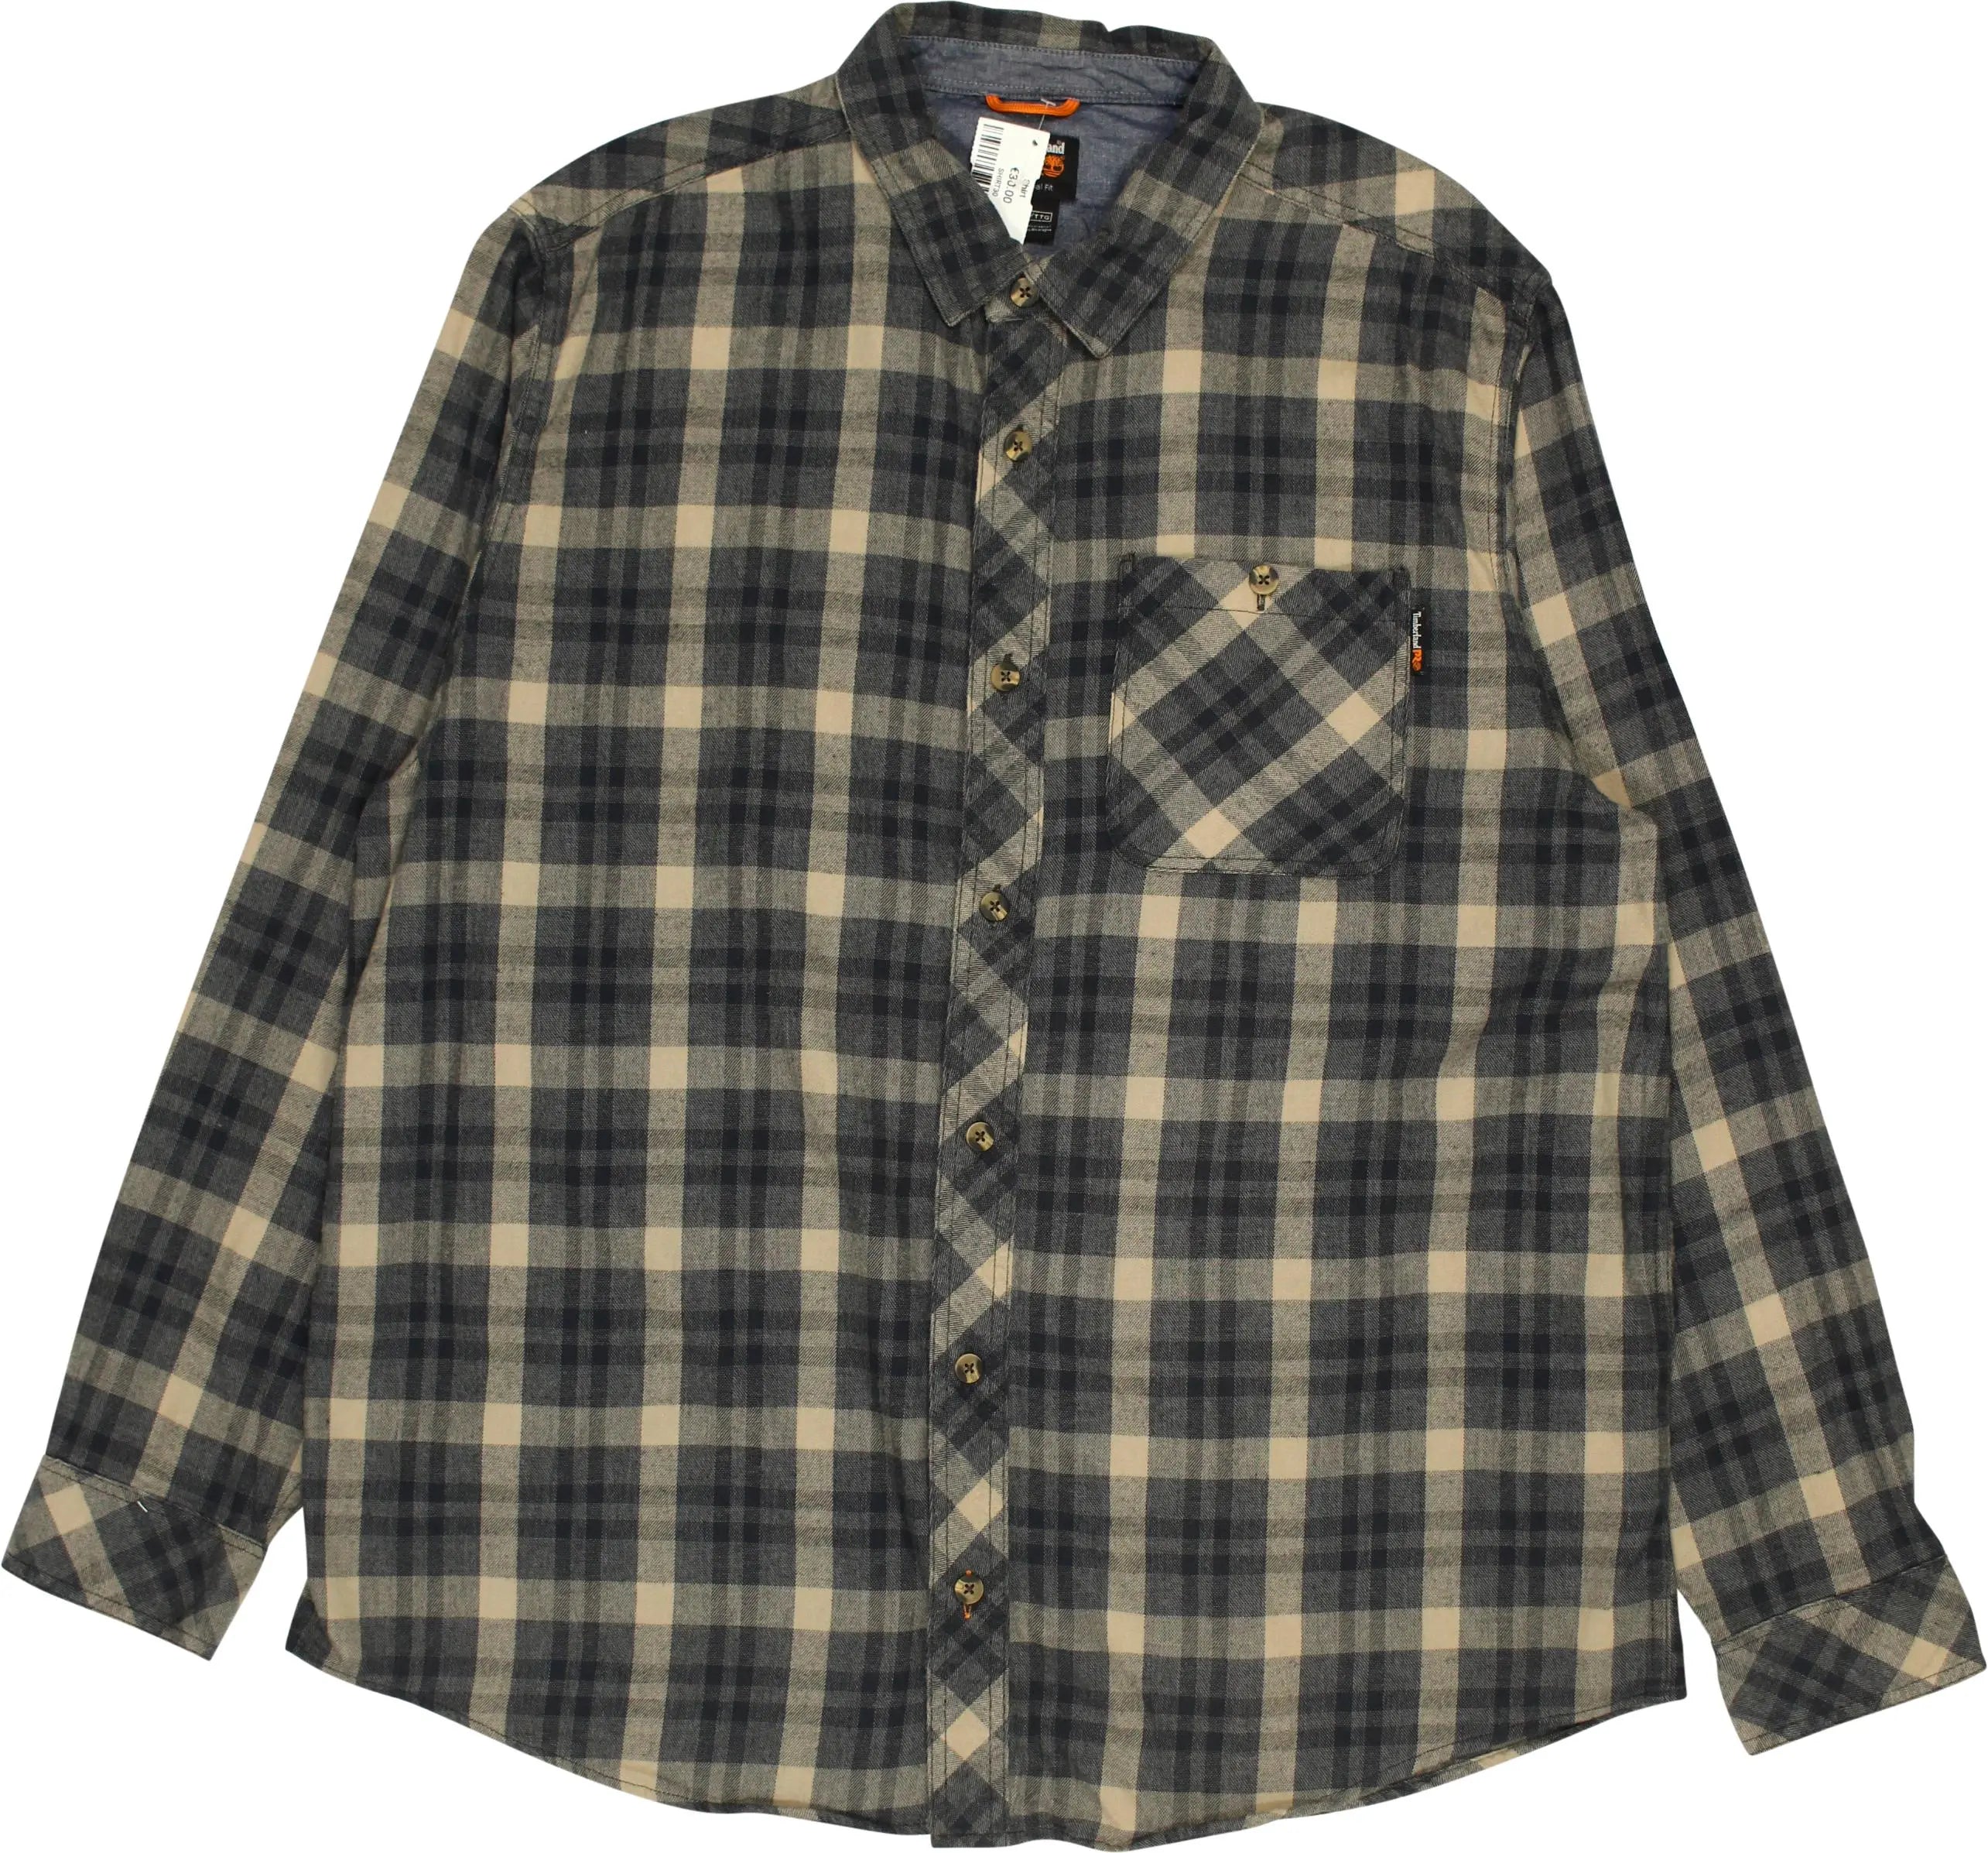 Timberland - Checkered shirt by Timberland- ThriftTale.com - Vintage and second handclothing